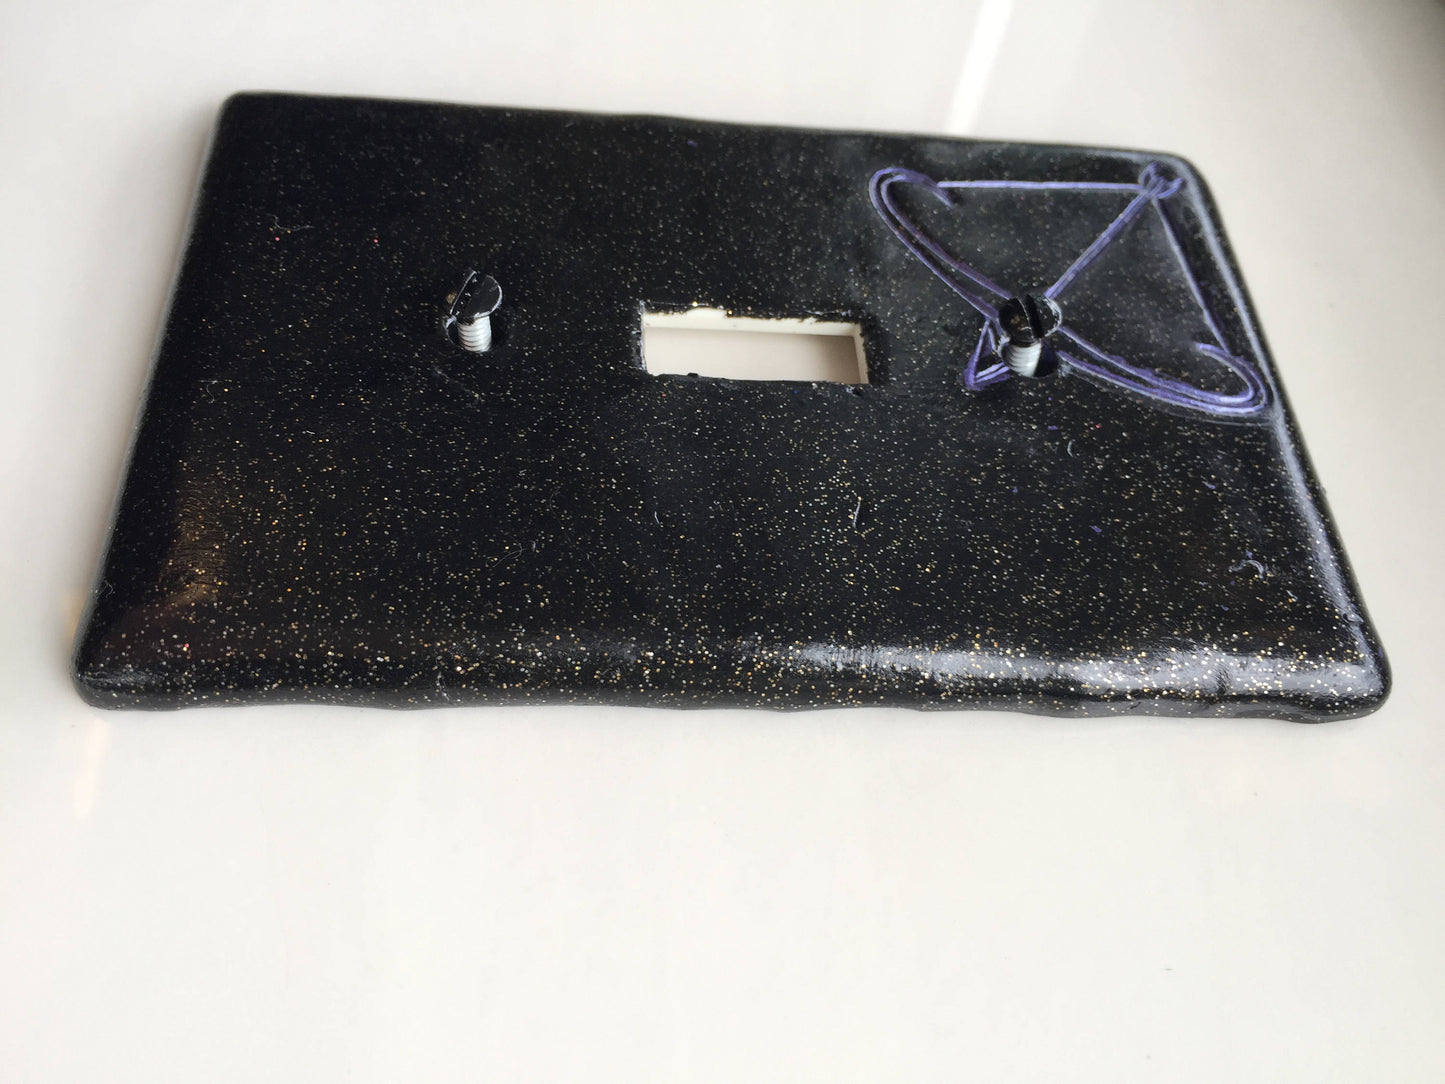 Sagittarius the Archer light switch plate cover for single toggle switch plate cover, black with glitter purple custom colors available